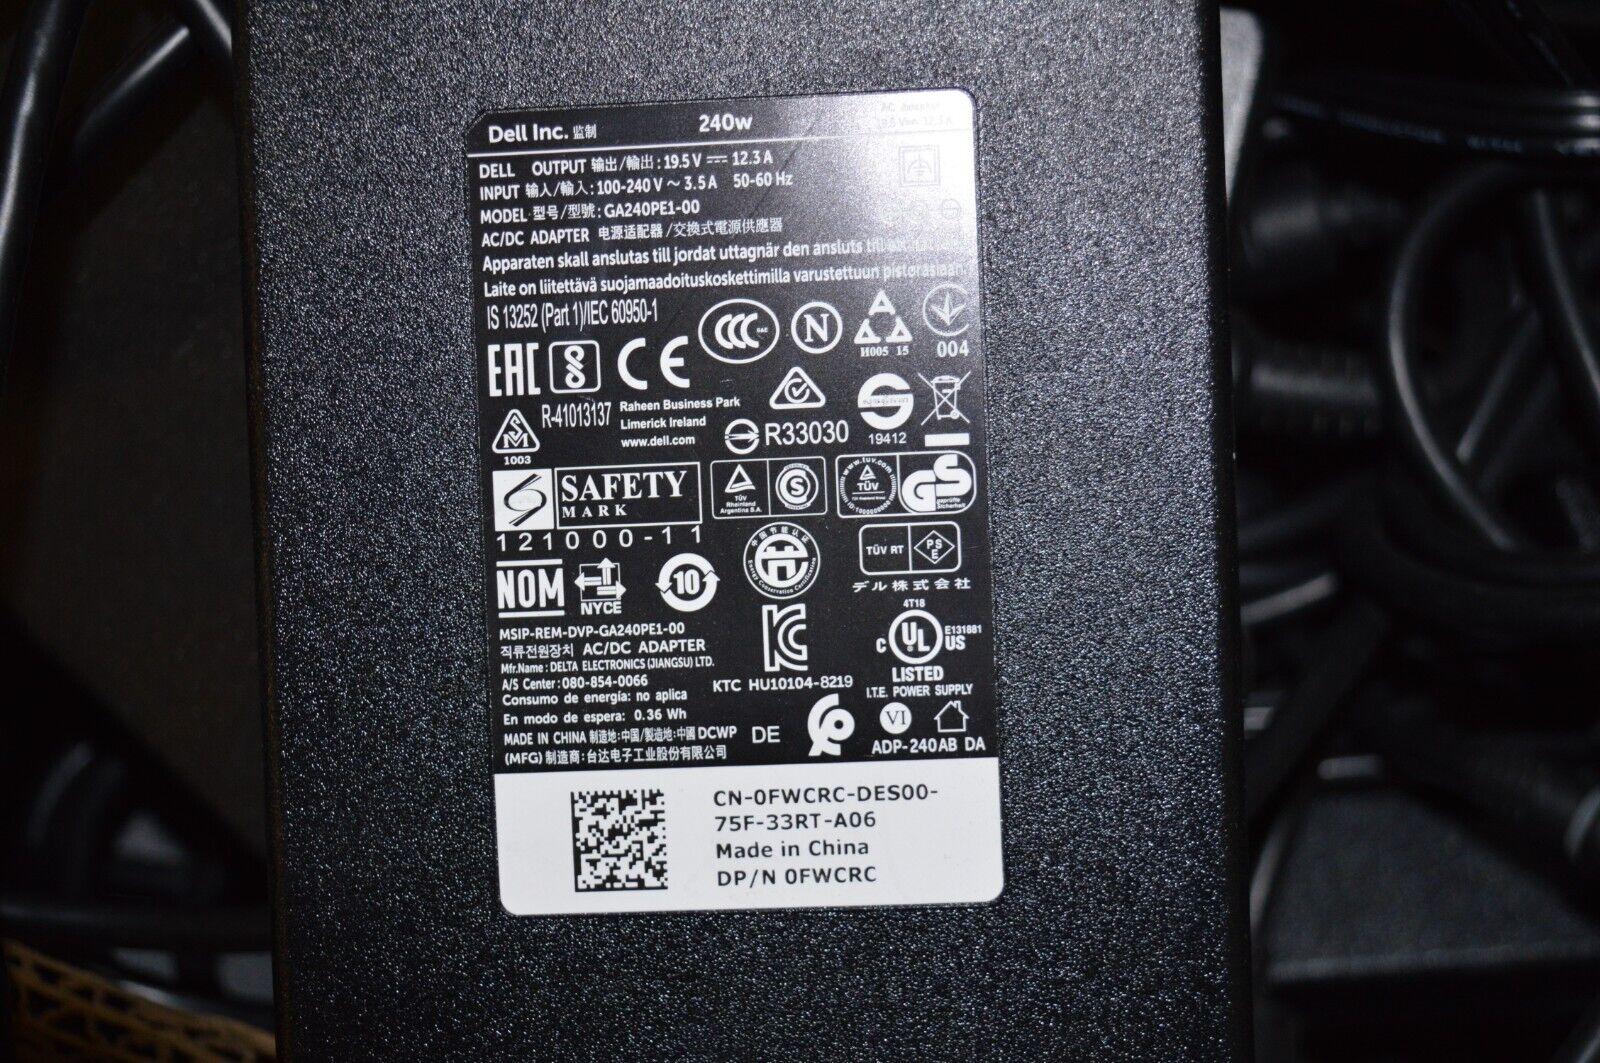 Genuine OEM Dell 240W 19.5V 12.3A AC Laptop Power Charger GA240PE1-00 FWCRC